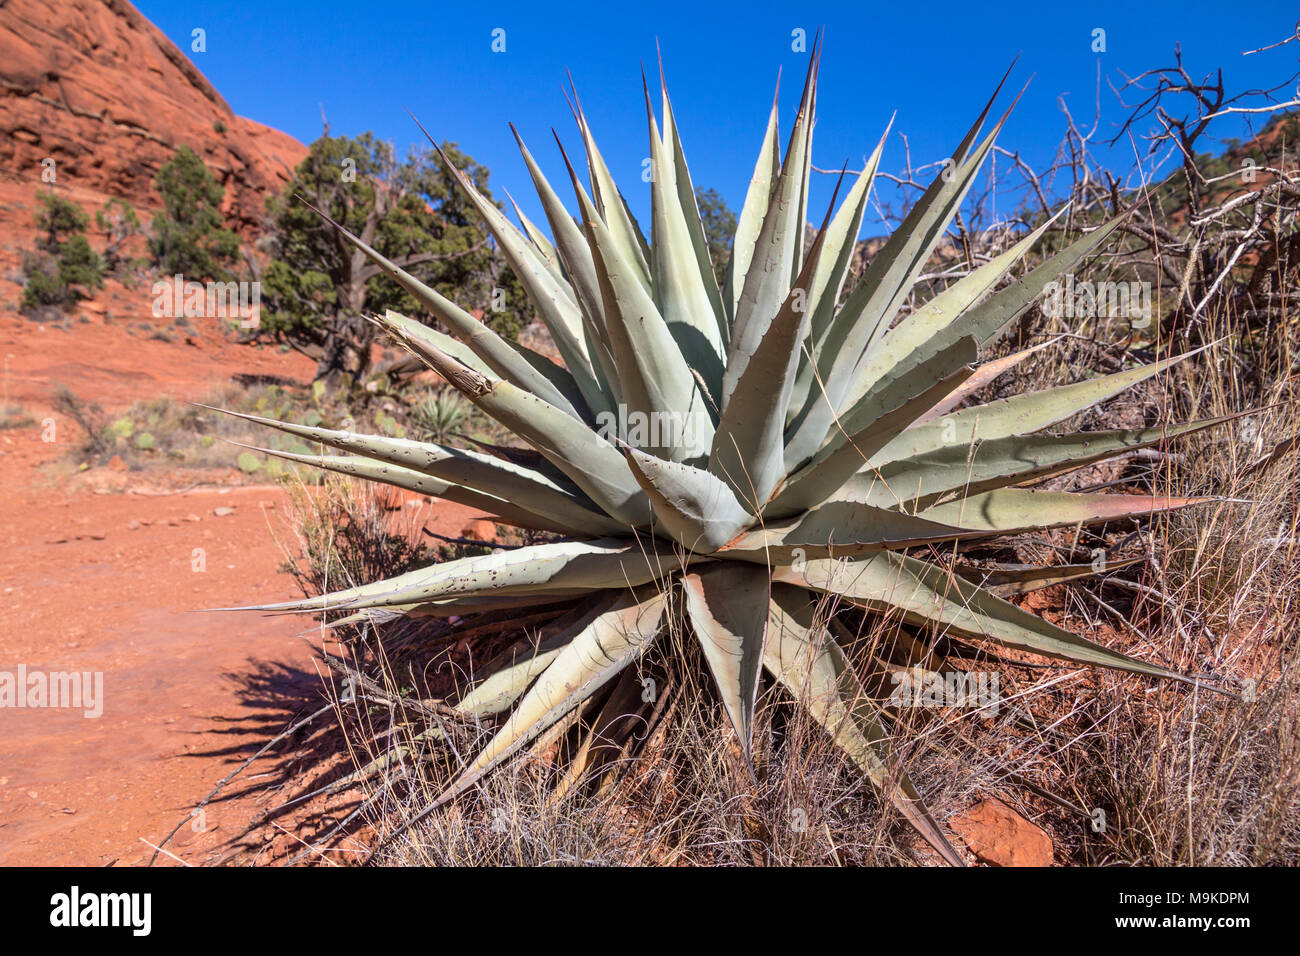 Large, healthy Aloe Vera plant with spiky, tough, protective leaves radiating from center Stock Photo